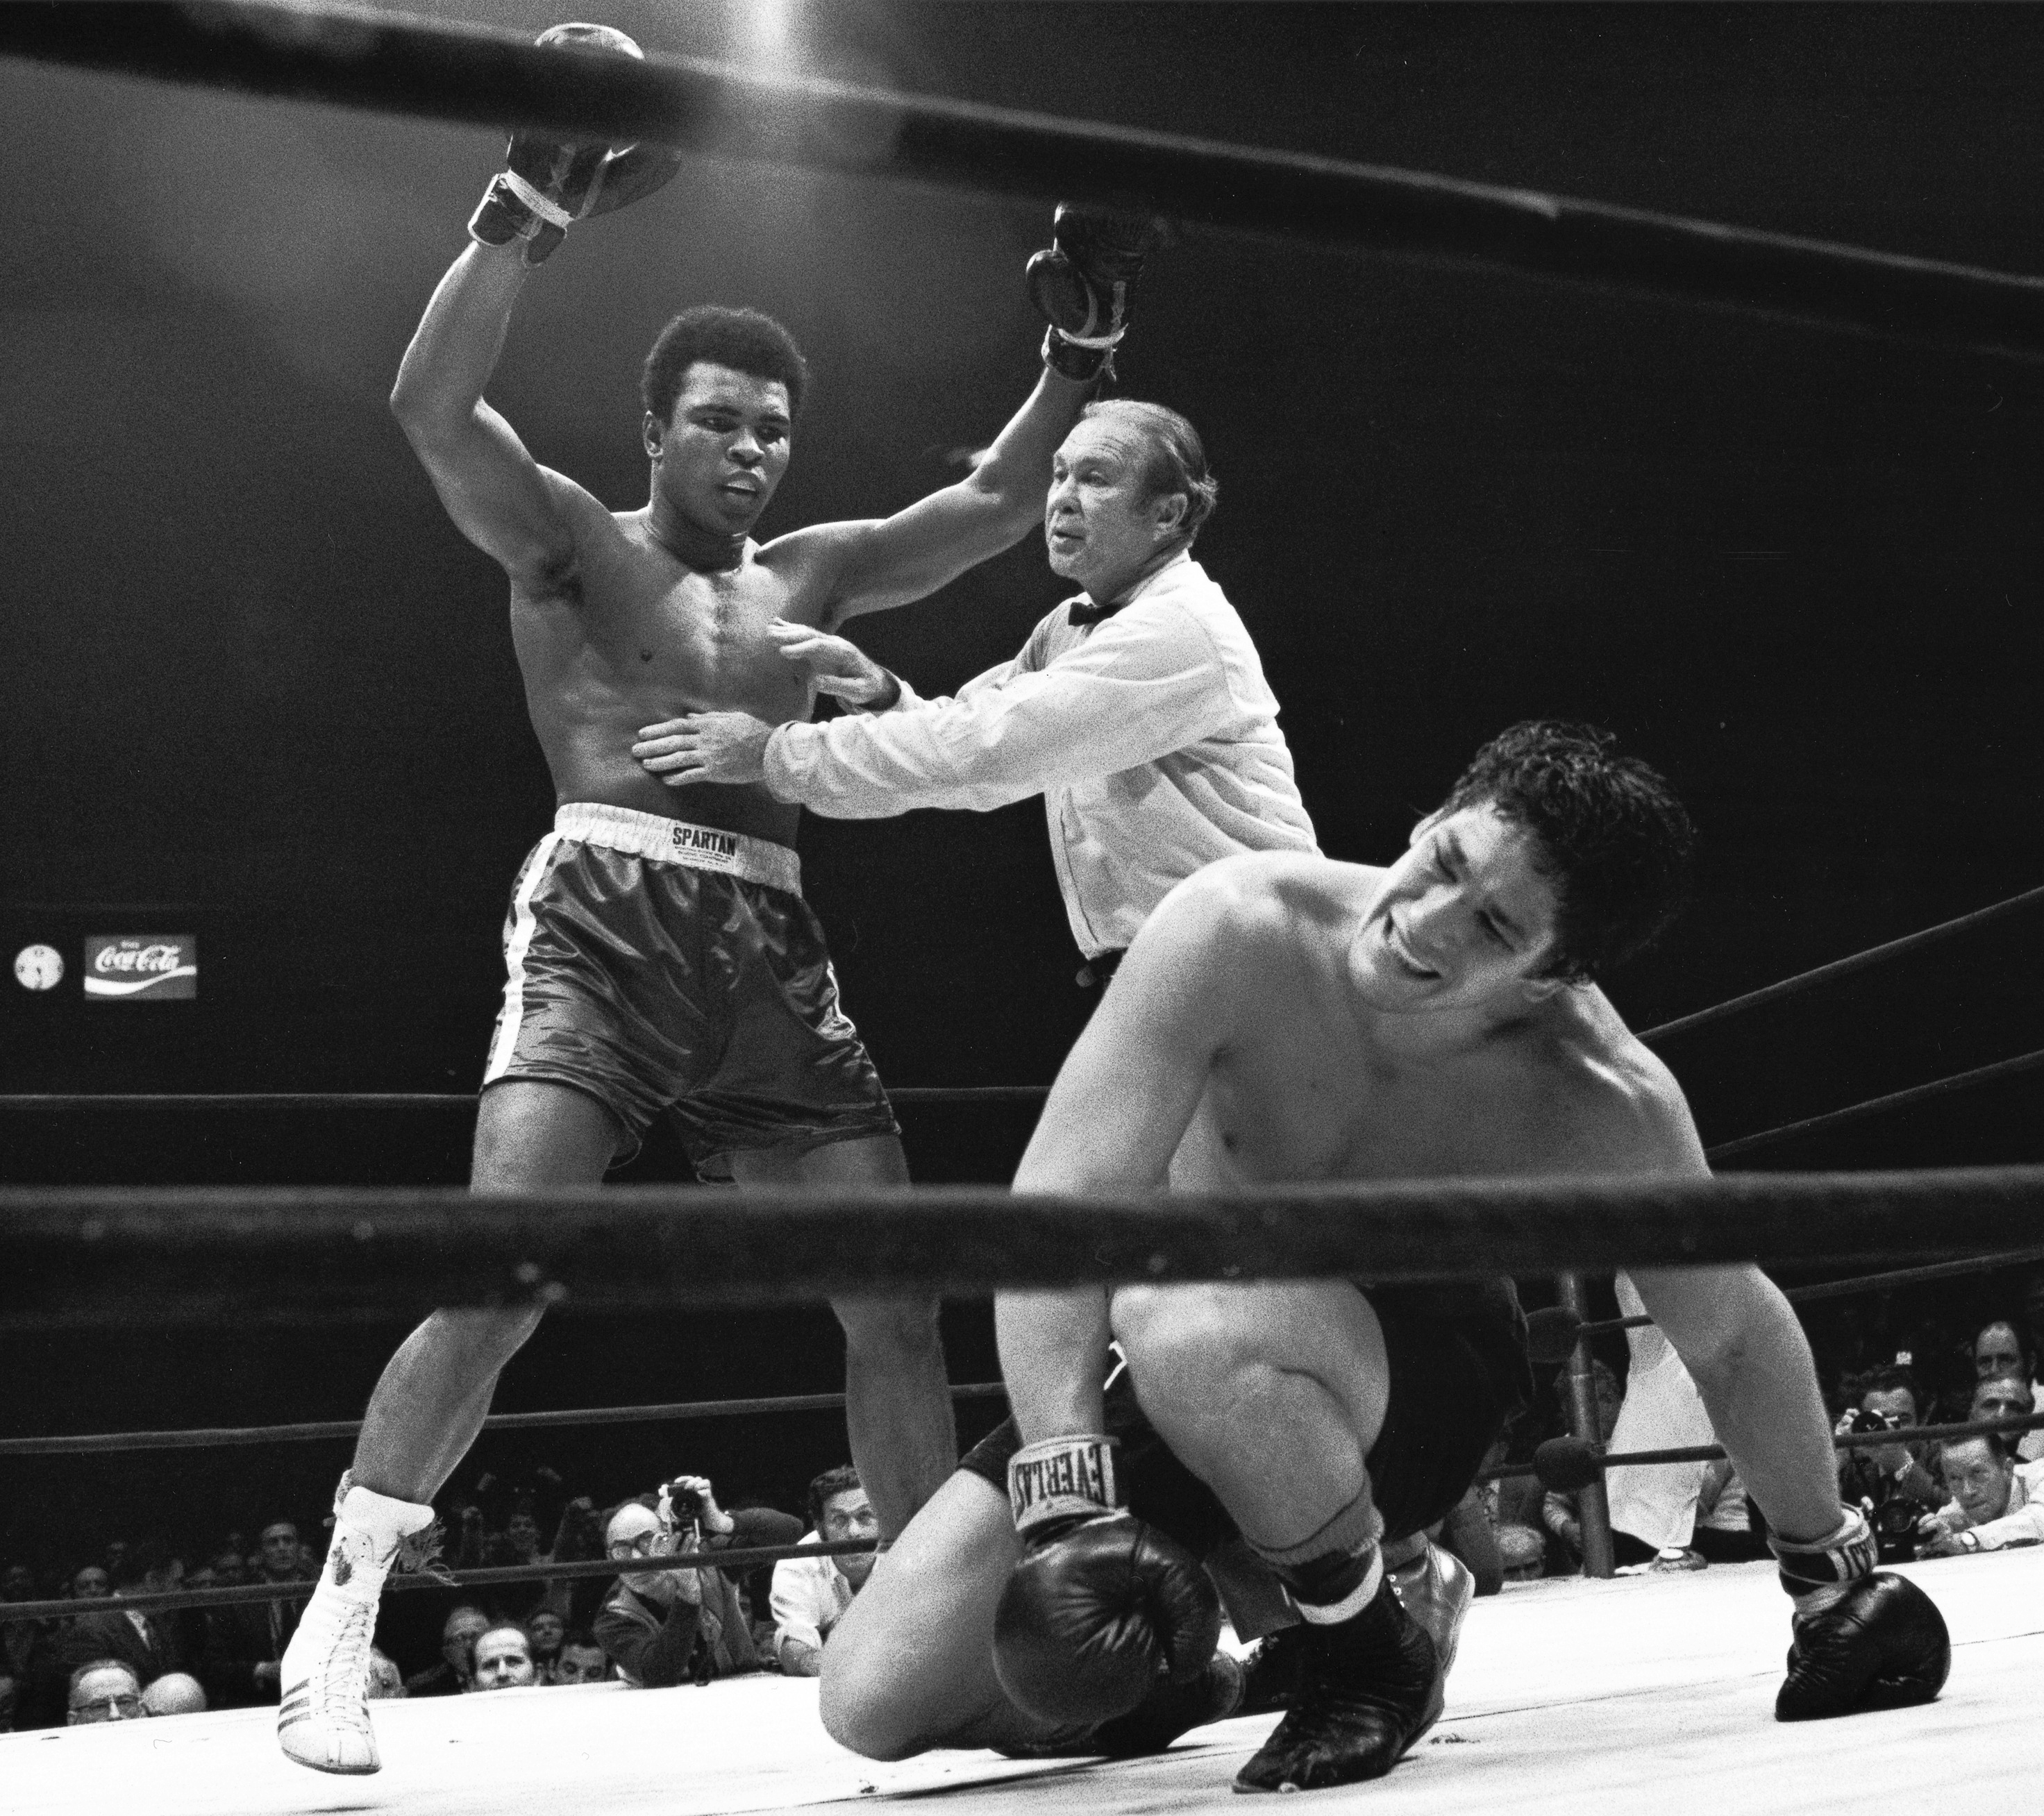 Muhammad Ali gets held back by referee Mark Conn after knocking down Oscar Bonavena during the NABF Heavyweight Title fight at Madison Square Garden.  New York, New York 12/7/1970 (Image # 2074 )